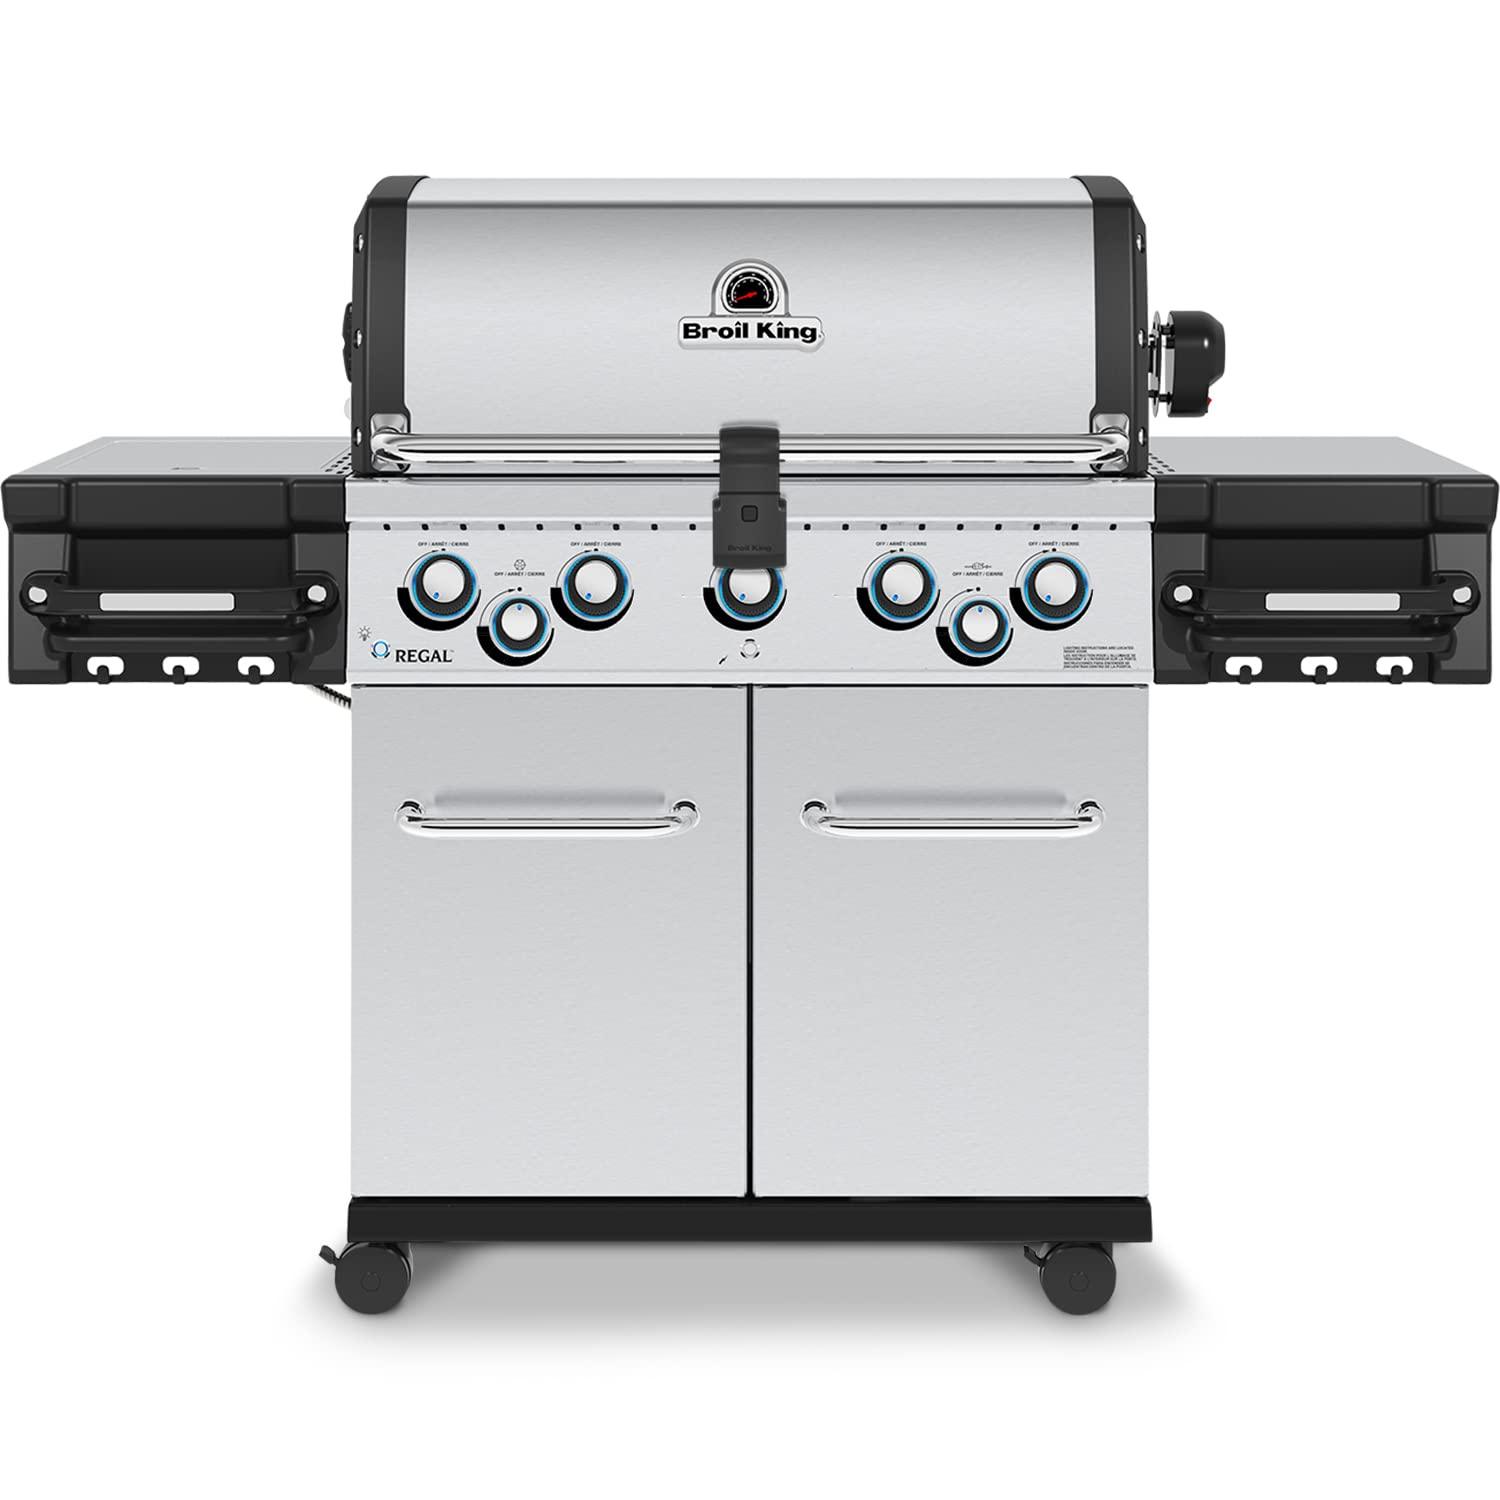 Broil King Regal S 590 Pro Natural Gas Grill - Premium 5-Burner Stainless Steel BBQ - CookCave